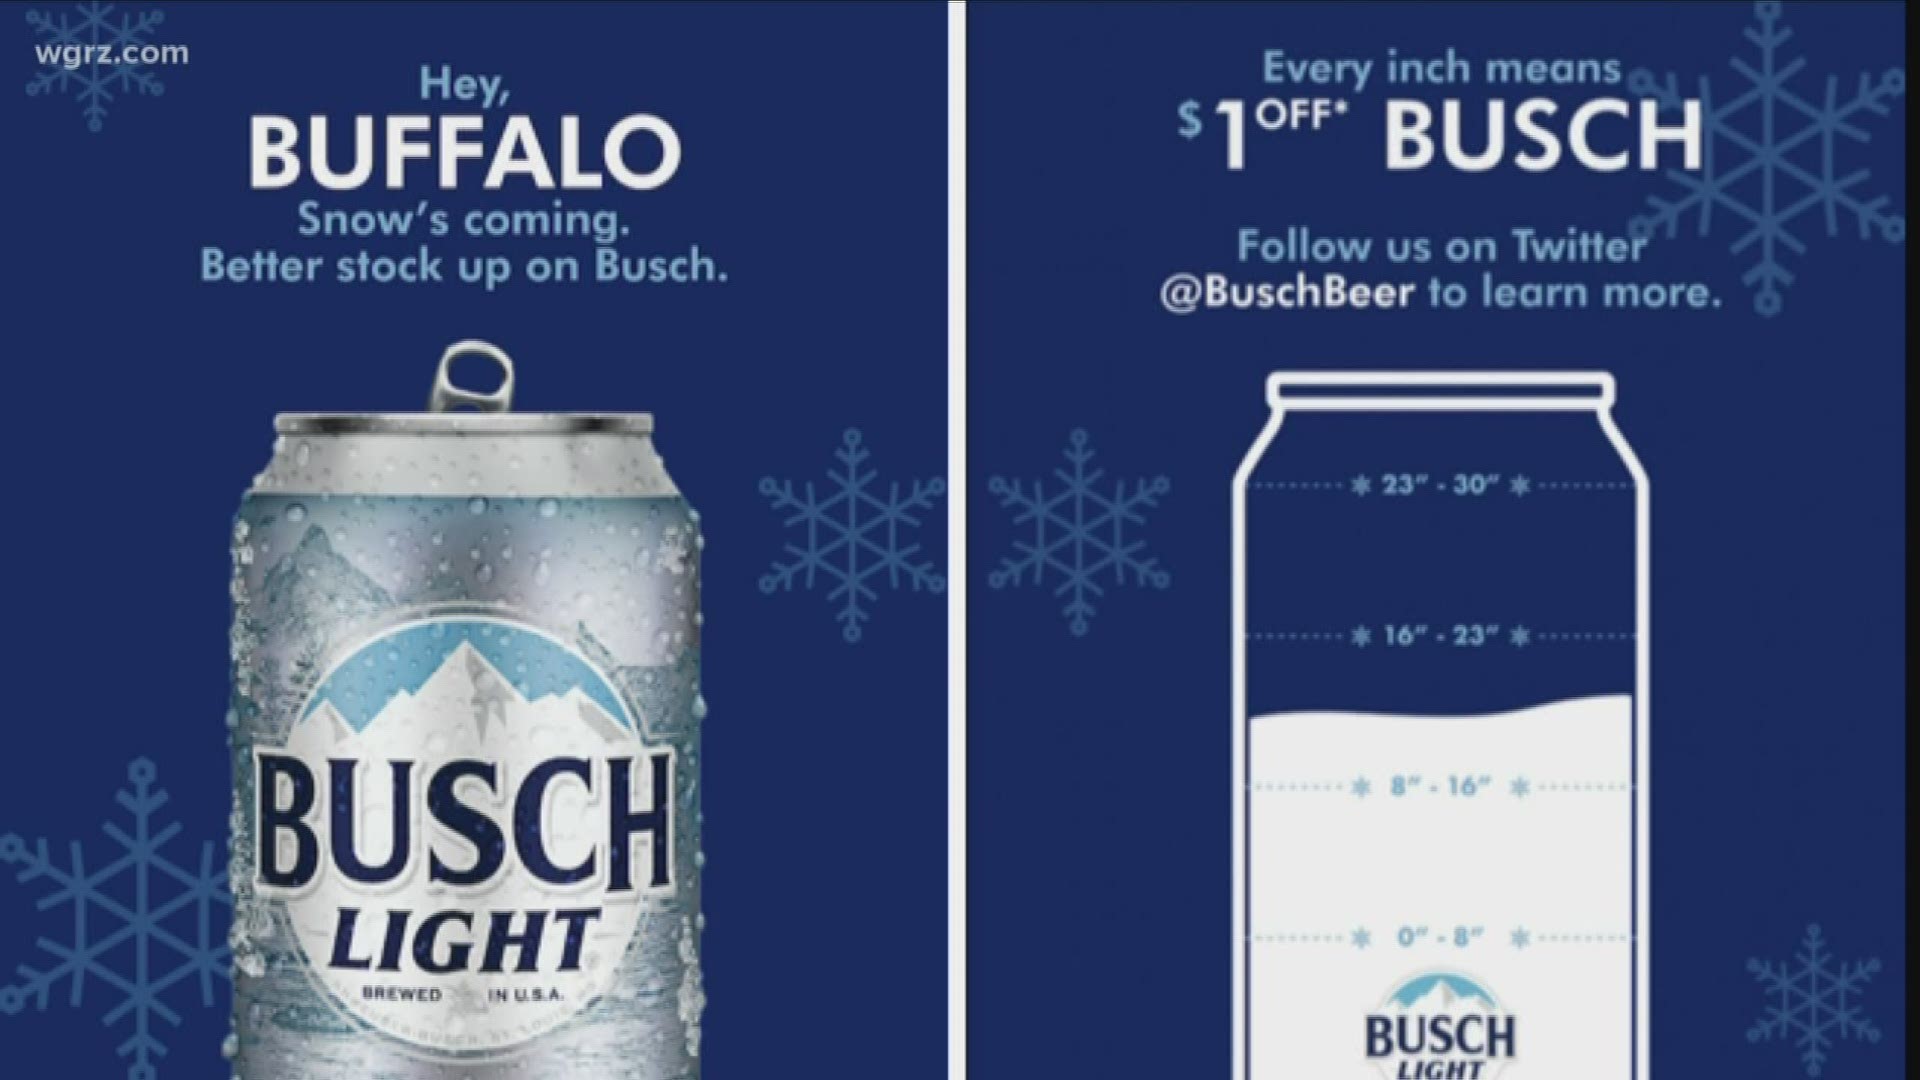 Busch beer offers 1 rebate for every inch of snow in Minneapolis